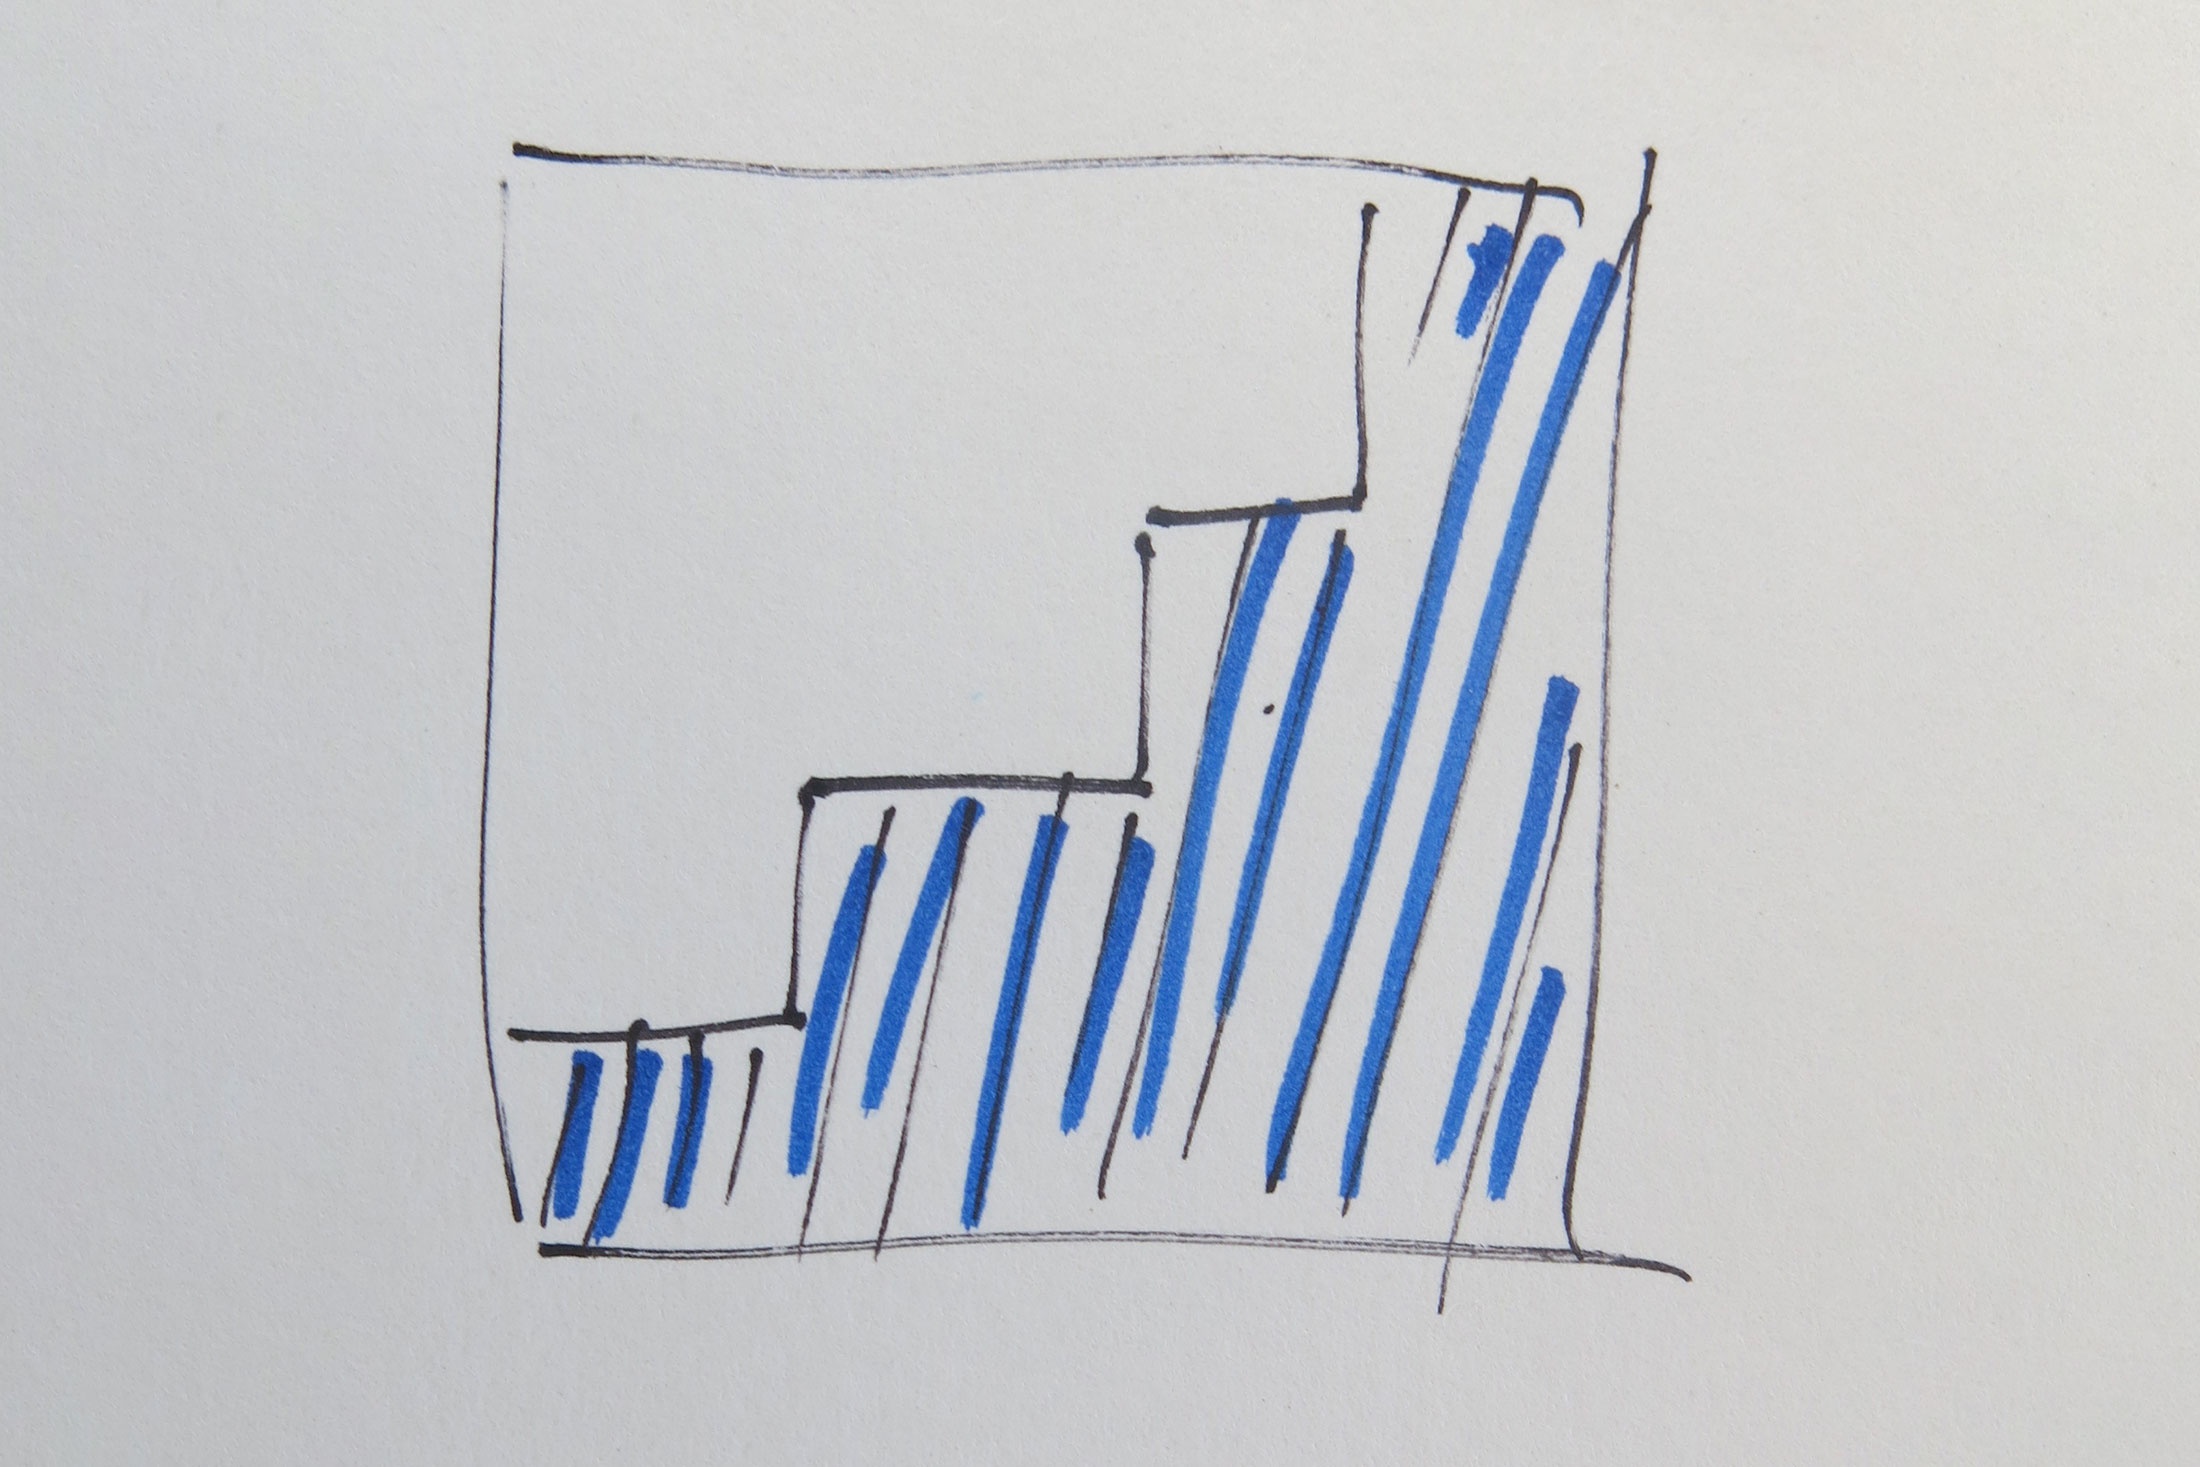 Ephemera from ‘Thoughts on the Stairs’ offsite residency at A4, consisting of a felt pen drawing that depicts a lateral view of A4’s staircase.
